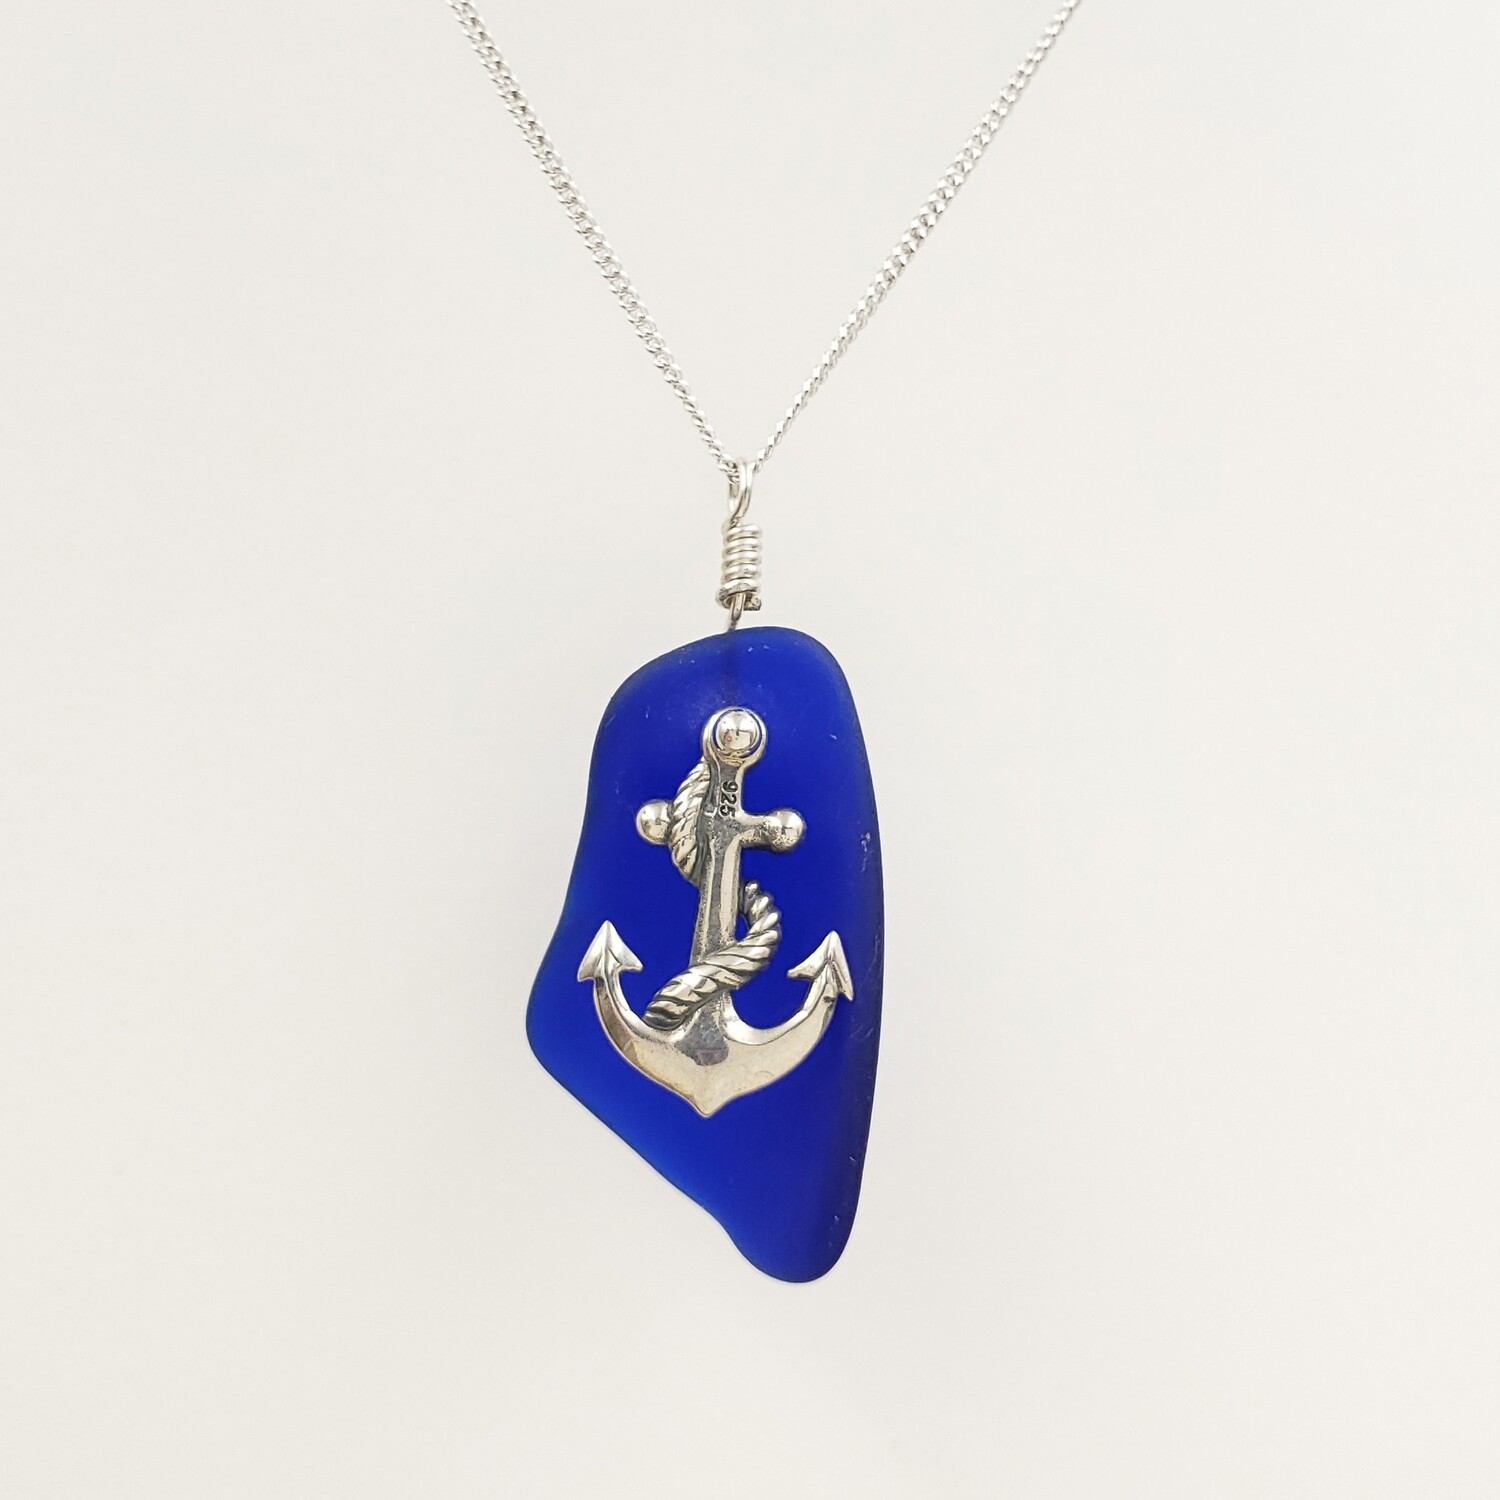 Cobalt Blue Maine Sea Glass and Anchor Charm Necklace